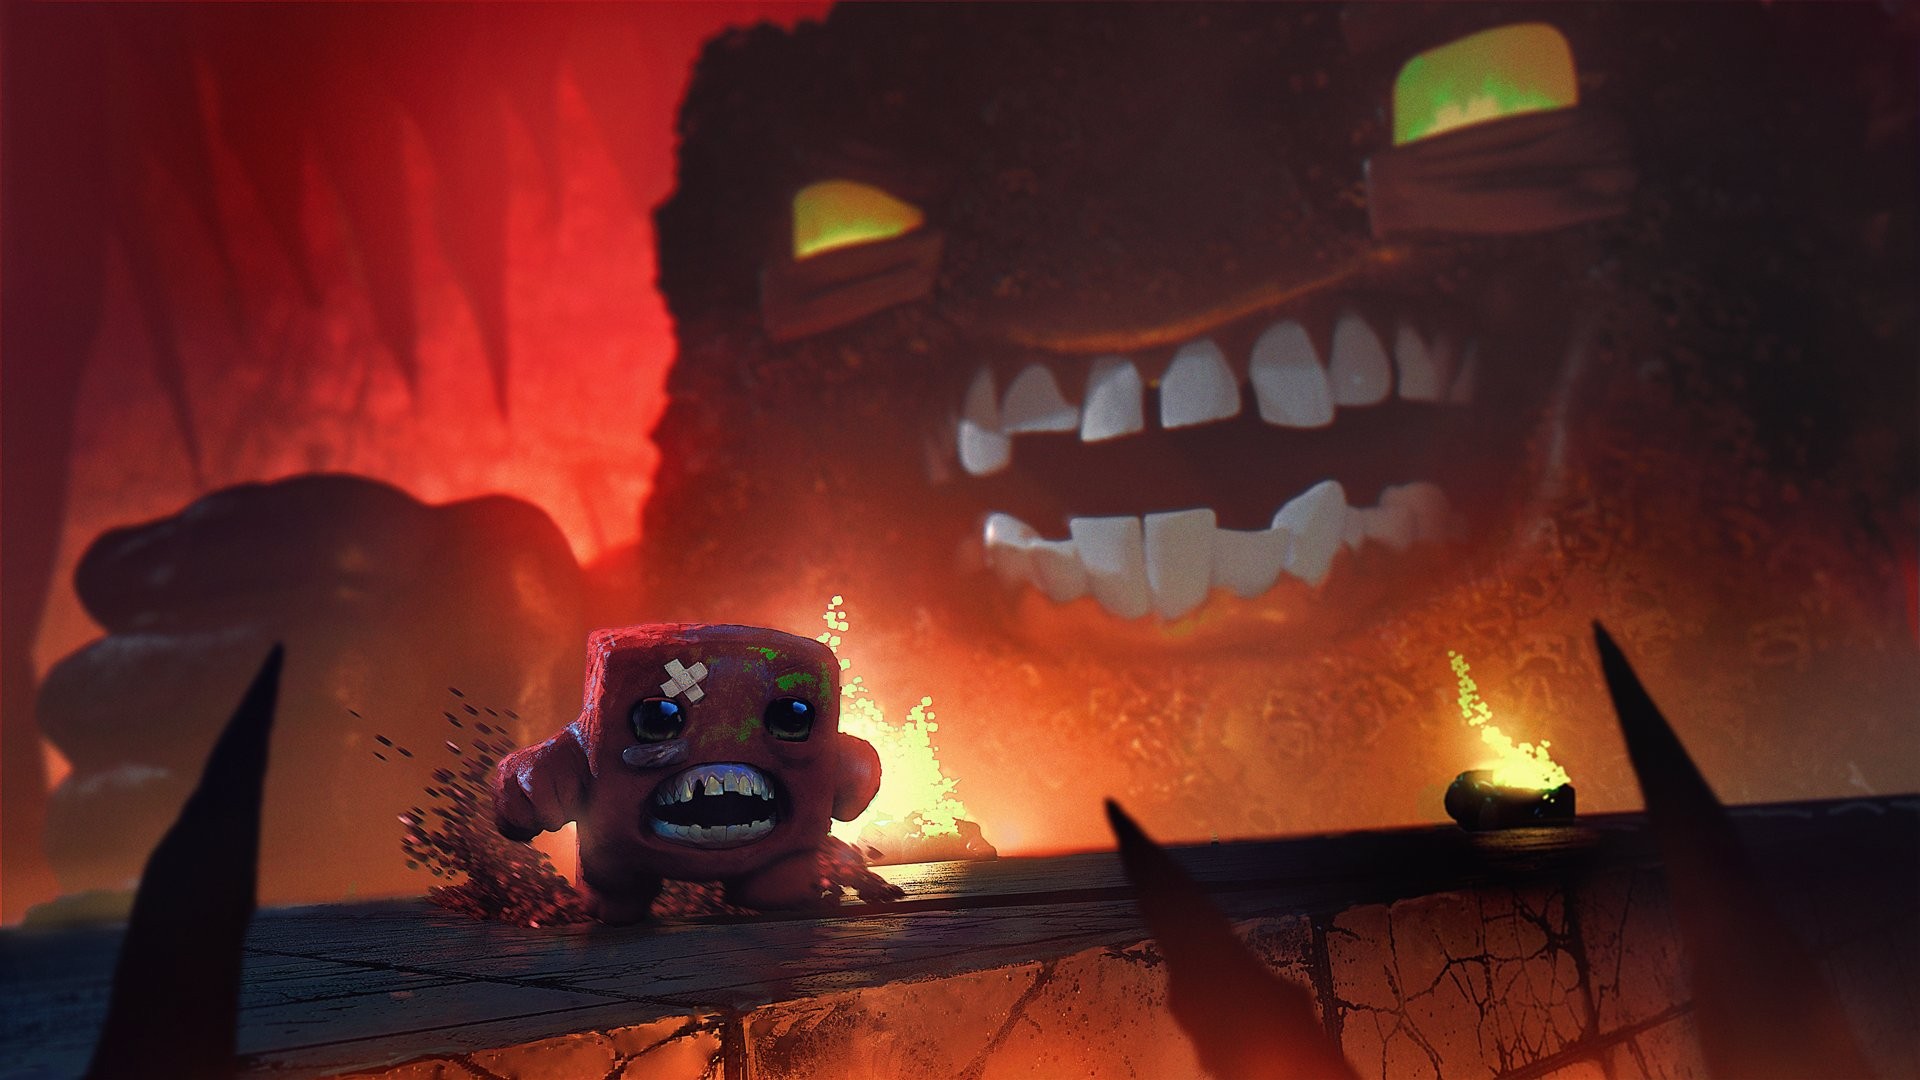 Super Meat Boy Video Game Heroes Video Games Red Artwork Video Game Art 1920x1080